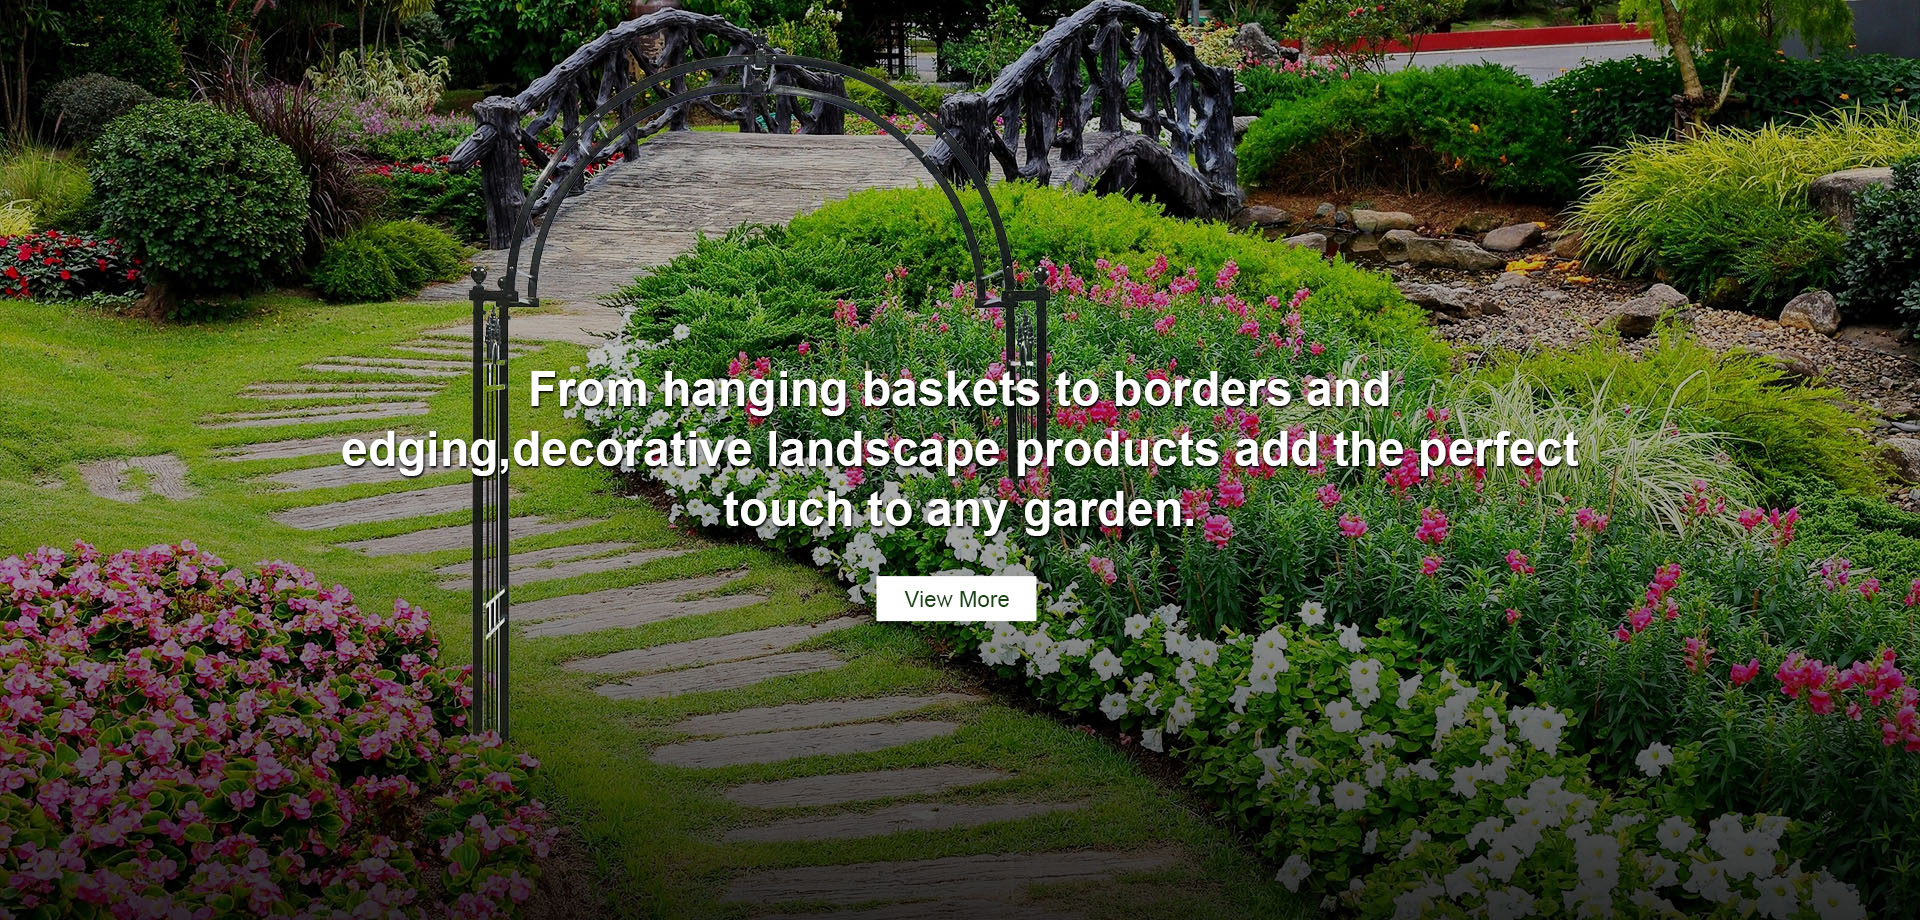 From hanging baskets to borders and edging,decorative landscape products add the perfect touch to any garden.